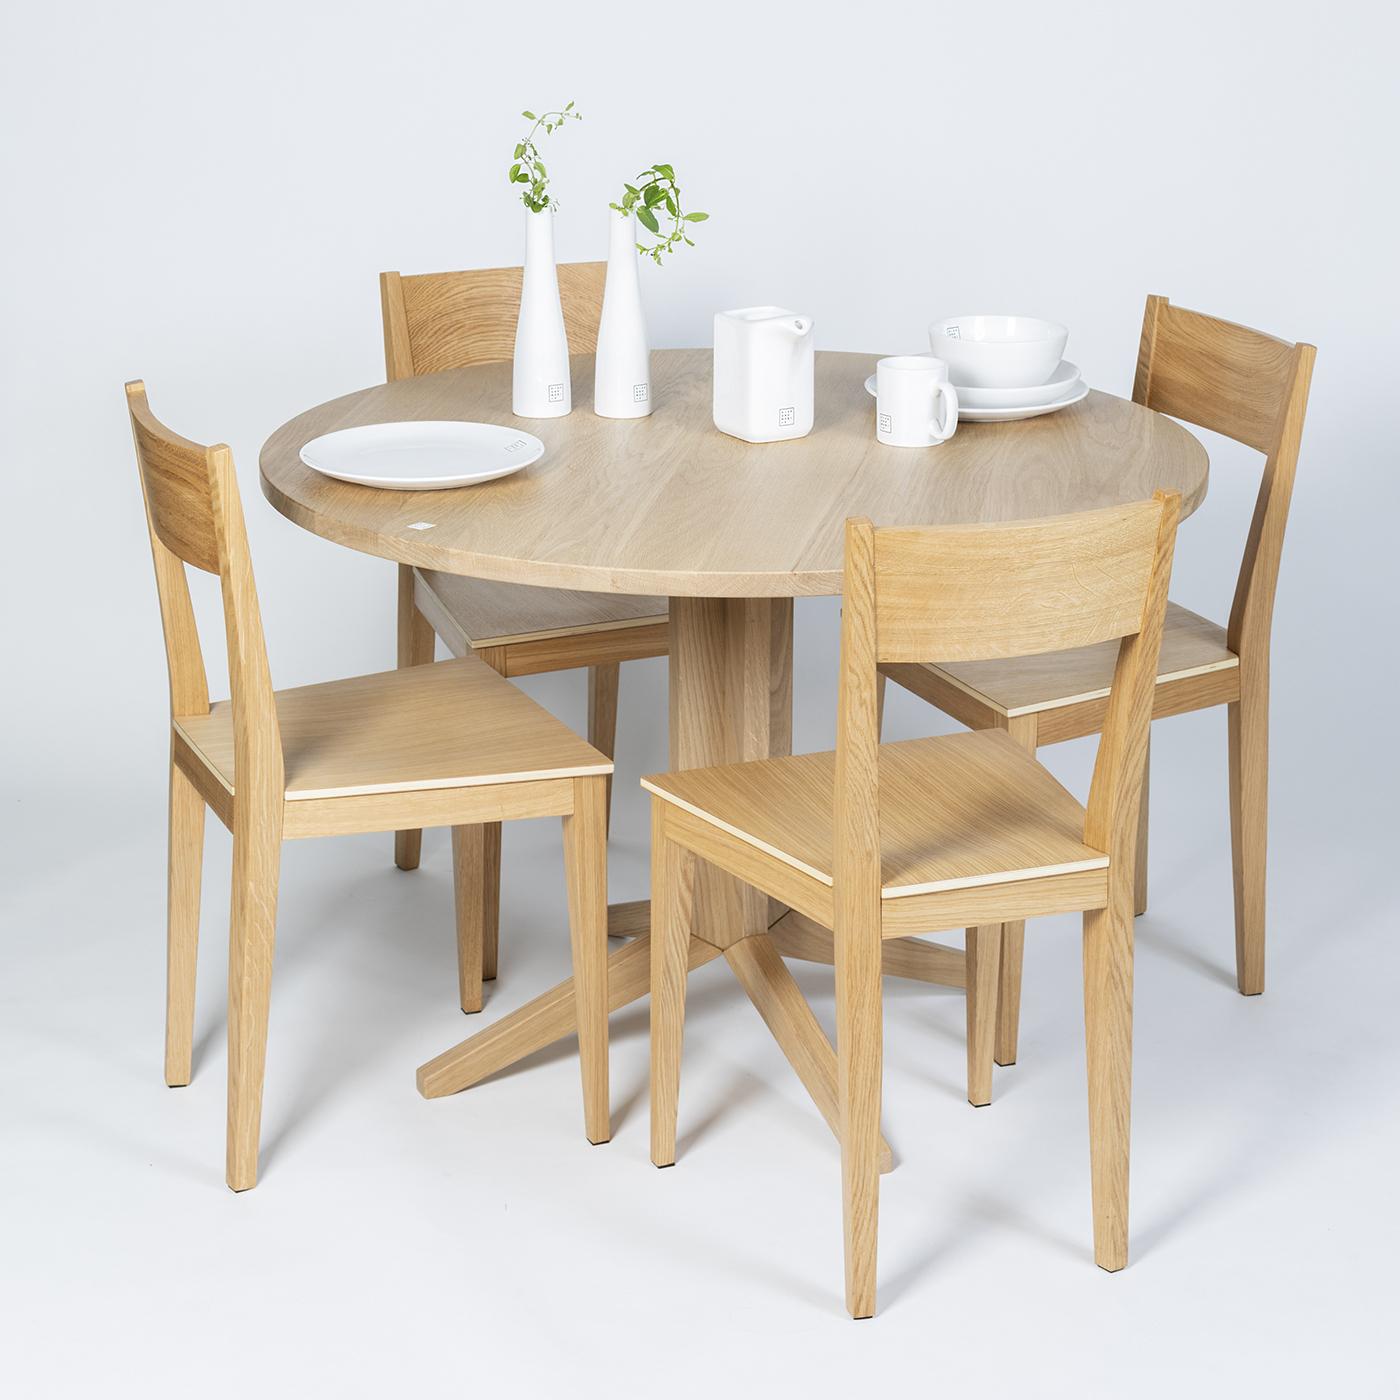 Clean, simple and elegant lines are what make this set of two chairs impossible not to love. The chairs come in solid oak that has been coated in an oil finish and they are perfect for any modern dining or living space. The slightly curved backrest